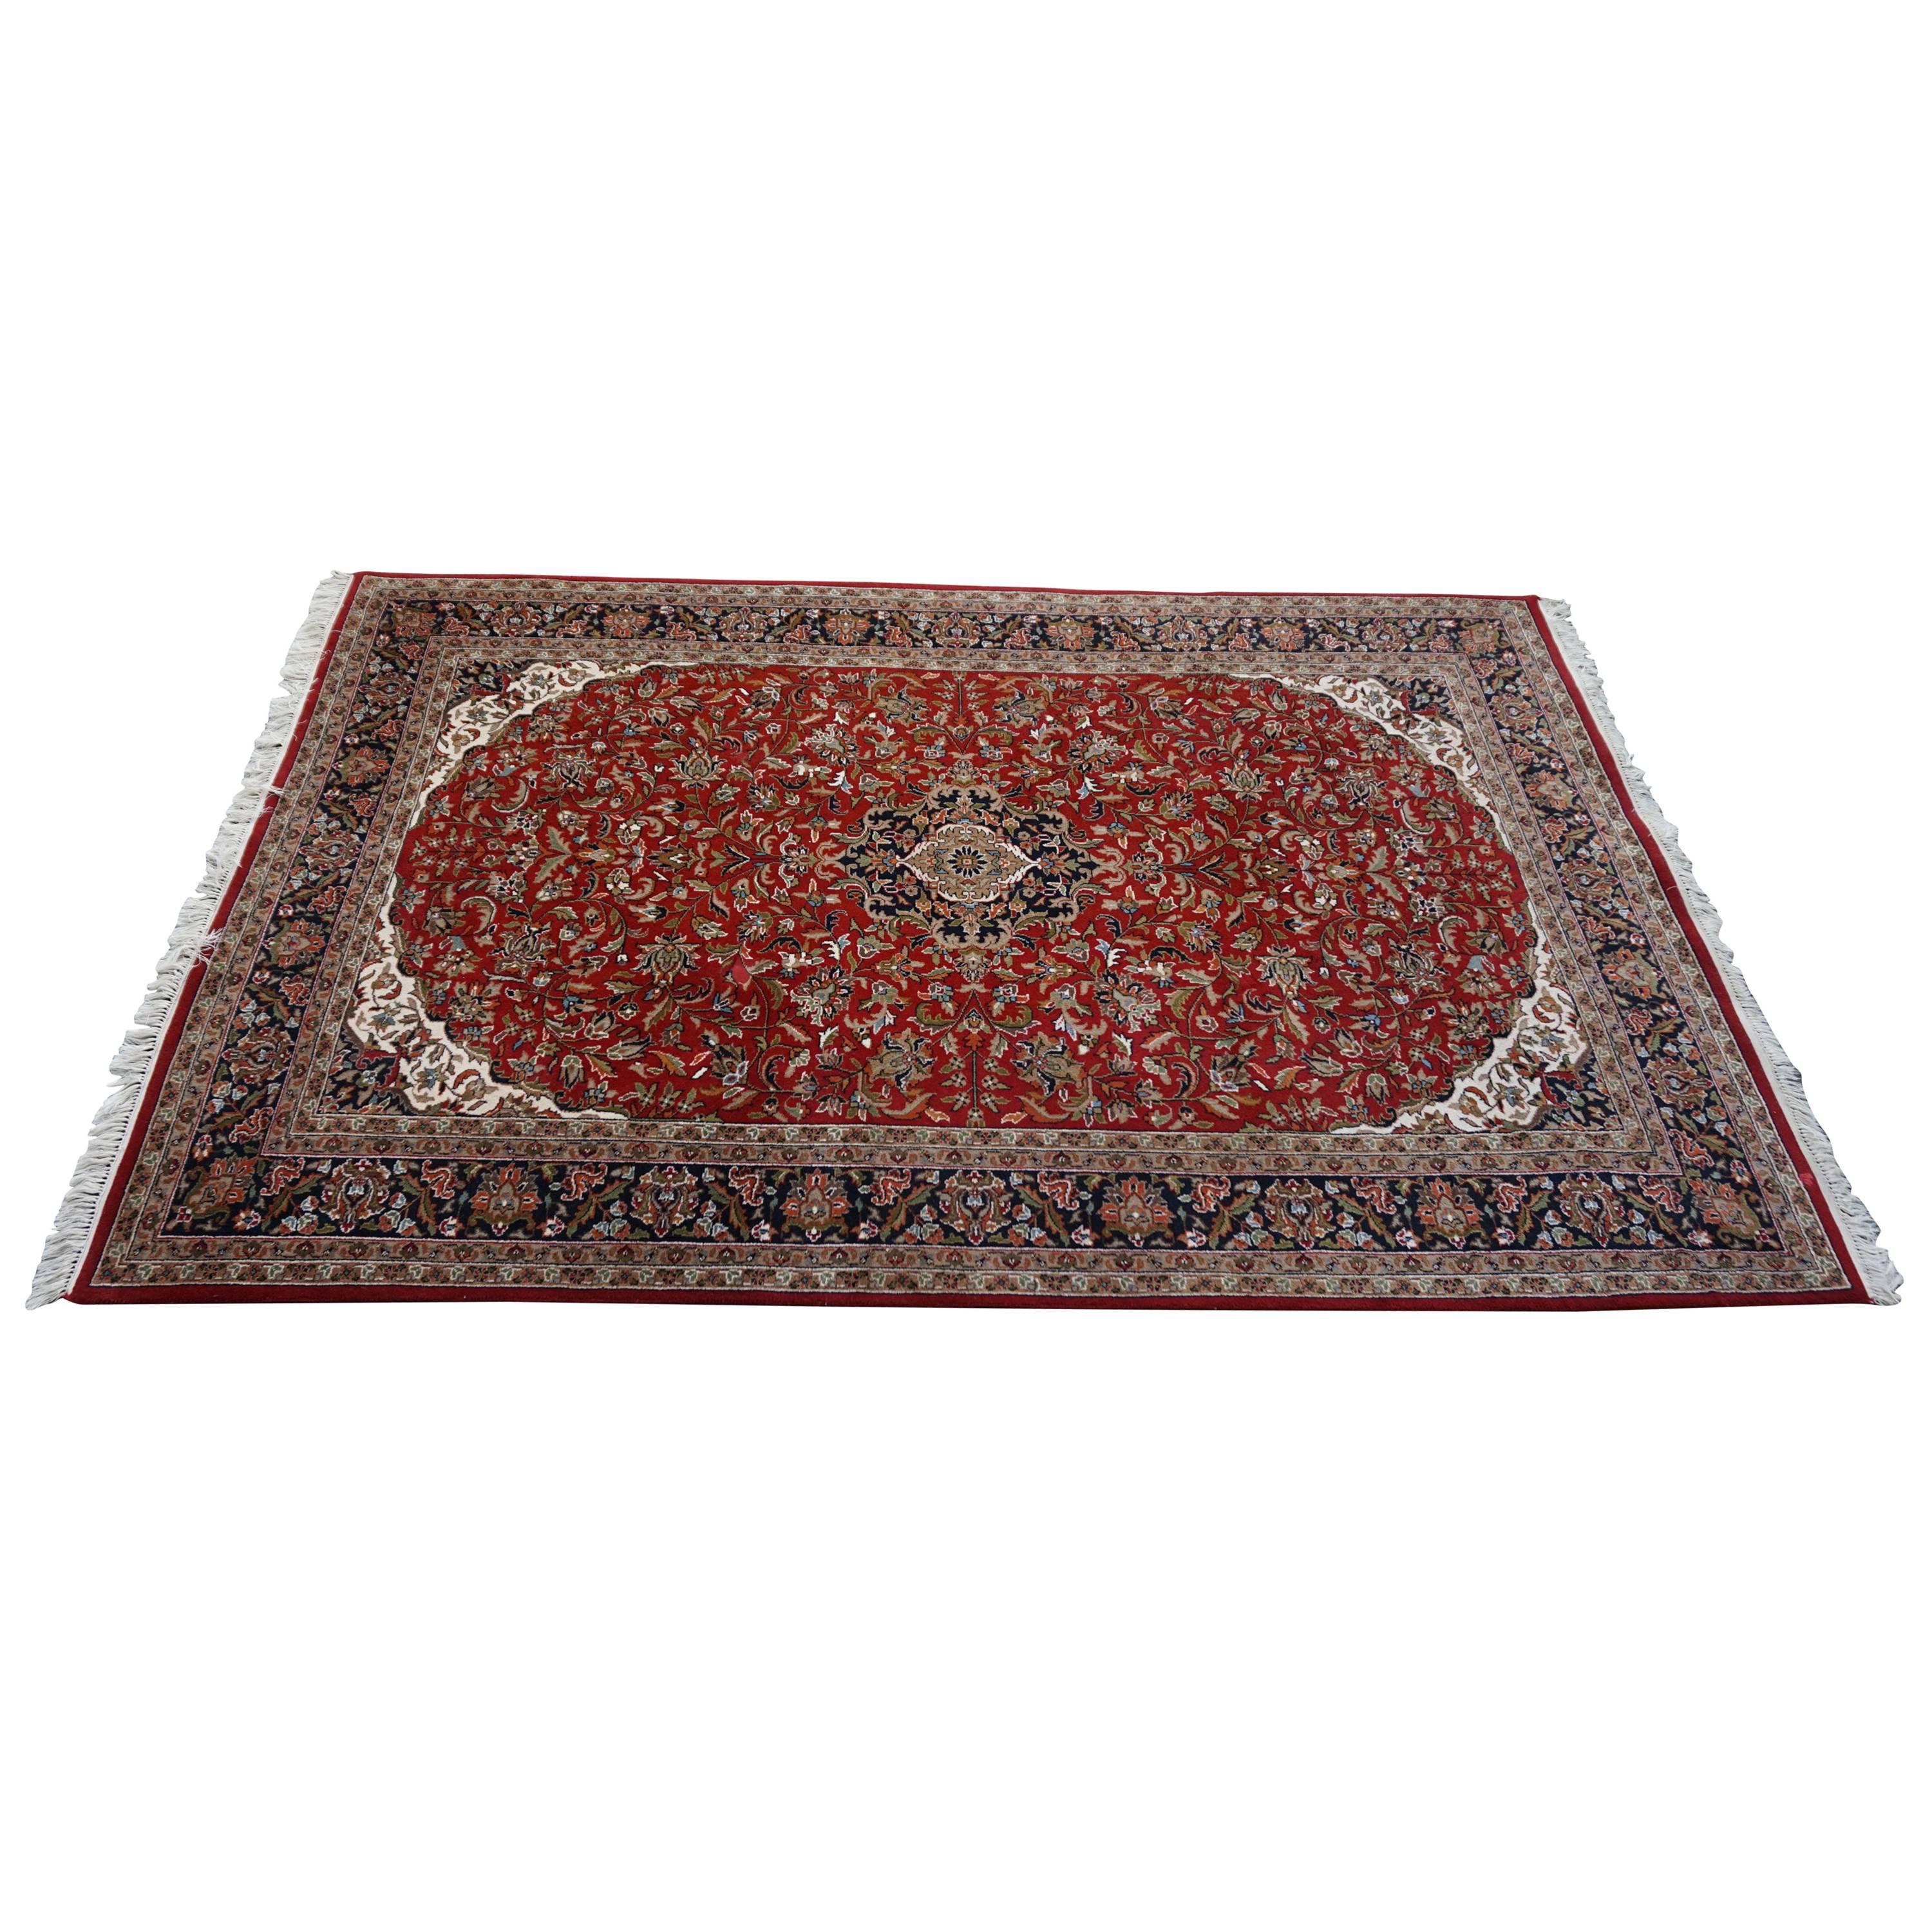 Stunning Bidjar Rug Fine Design and Vibrant Colors Hand-Knotted and Long